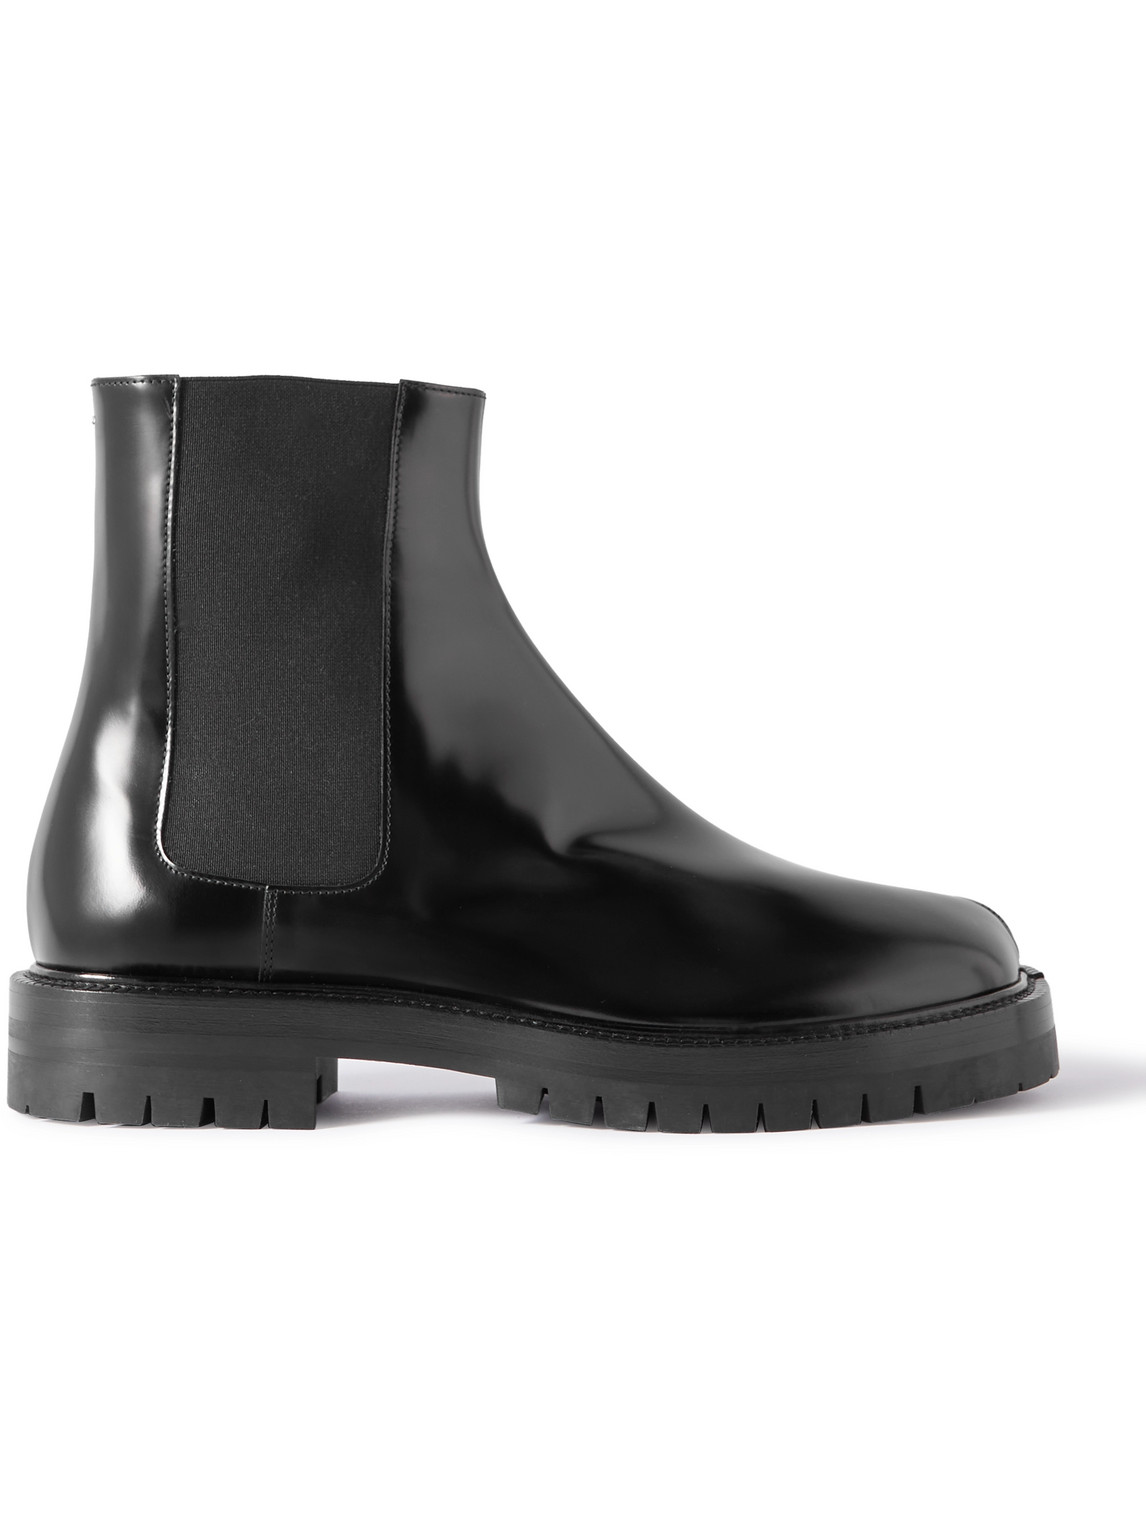 Maison Margiela Tabi Patent-leather Chelsea Boots In Black